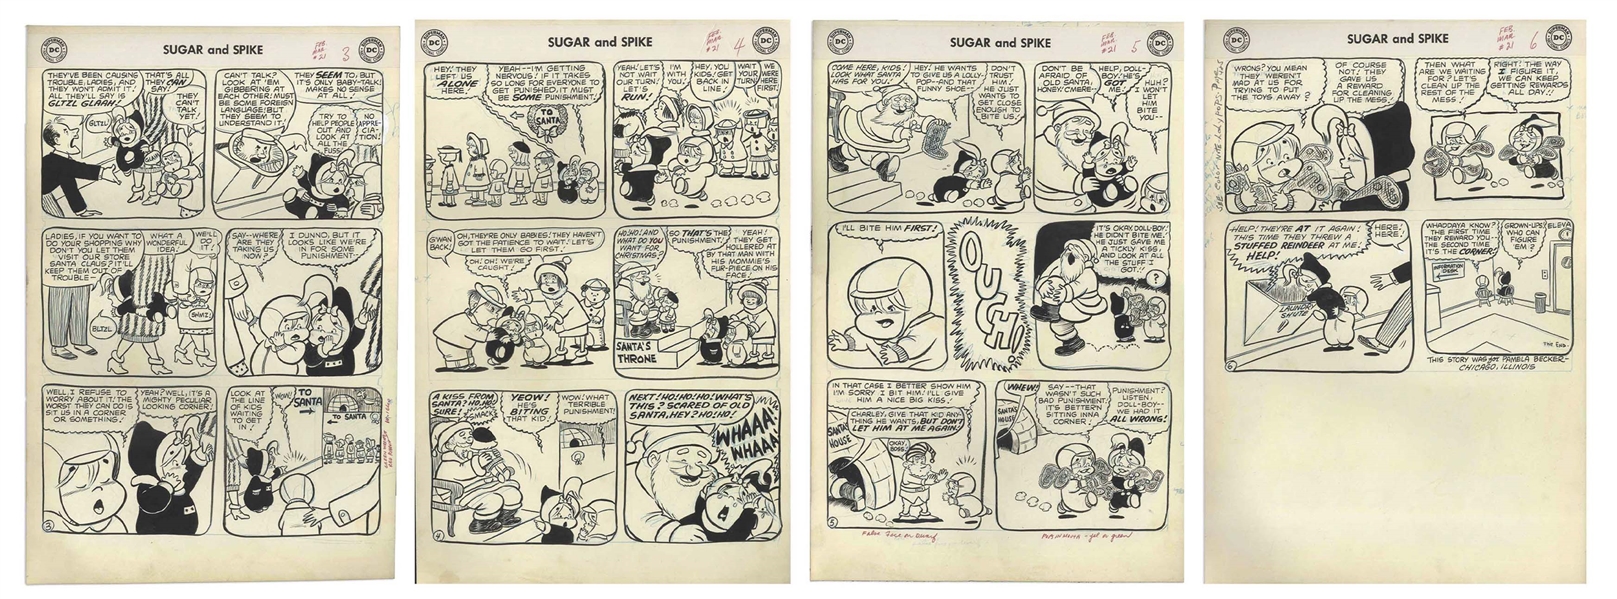 Sheldon Mayer Original Hand-Drawn ''Sugar and Spike'' Comic Book -- 26 Pages From the February-March 1959 Issue #21